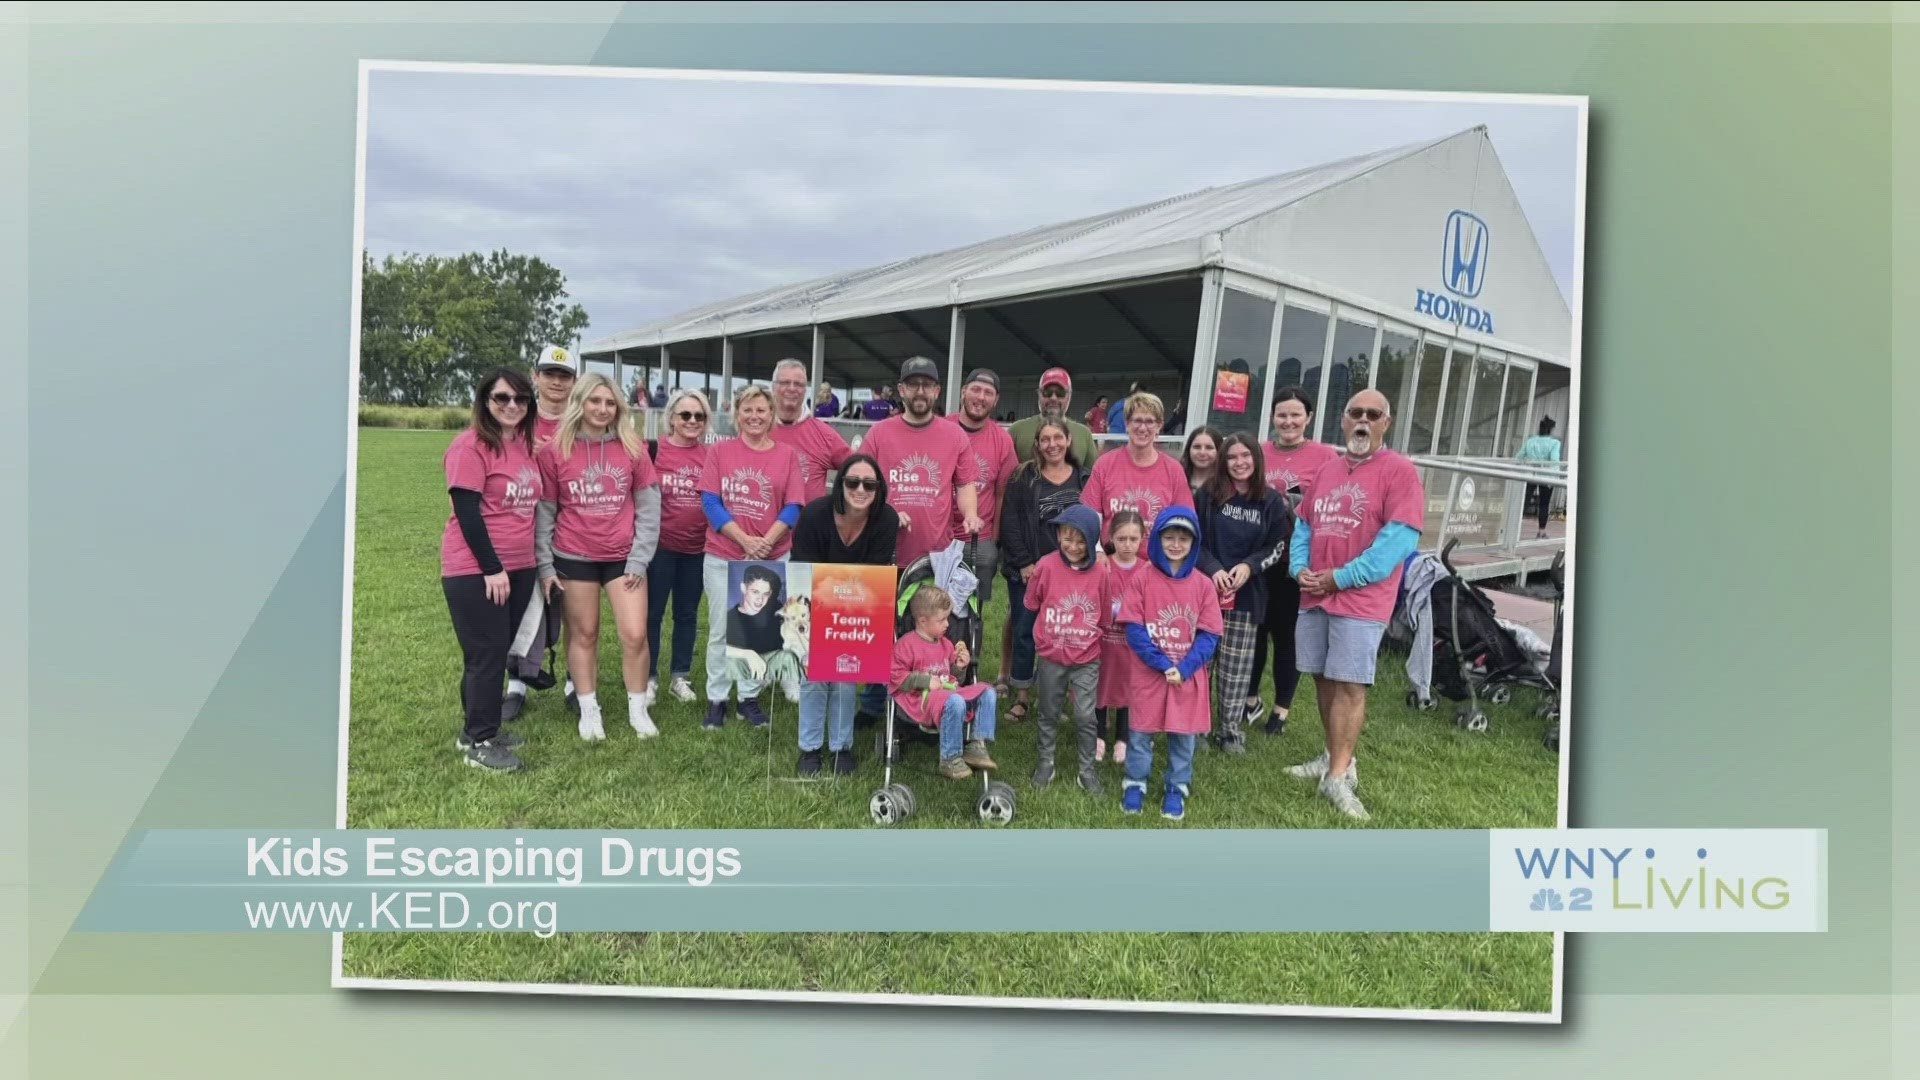 WNY Living-March 23rd- Kids Escaping Drugs (THIS VIDEO IS SPONSORED BY KIDS ESCAPING DRUGS)